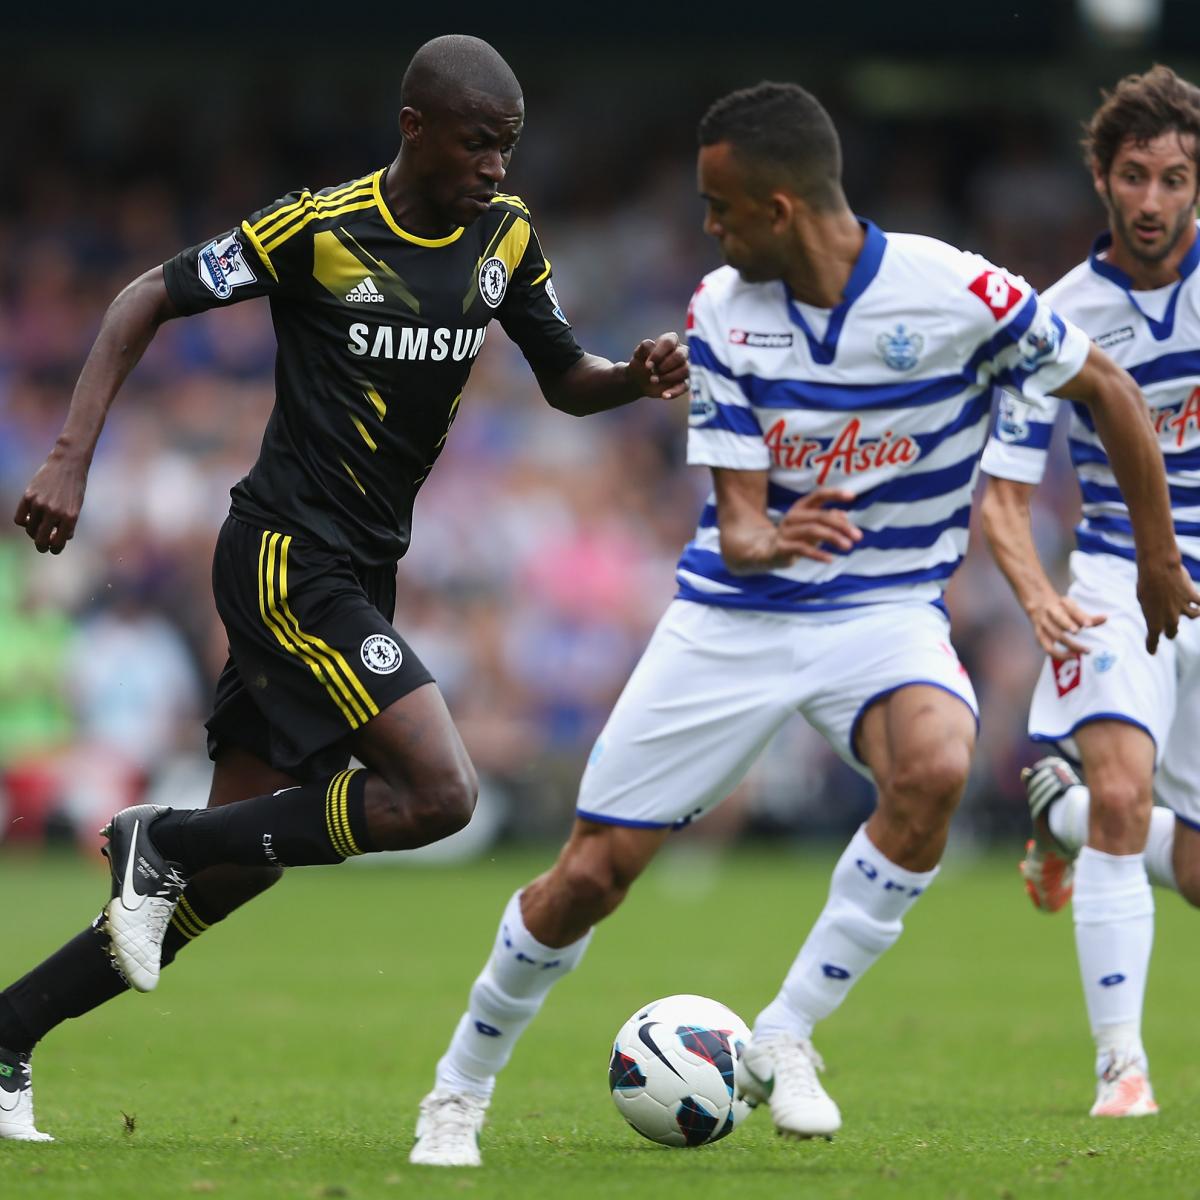 Chelsea vs qpr betting preview nfl my world is better place because of you